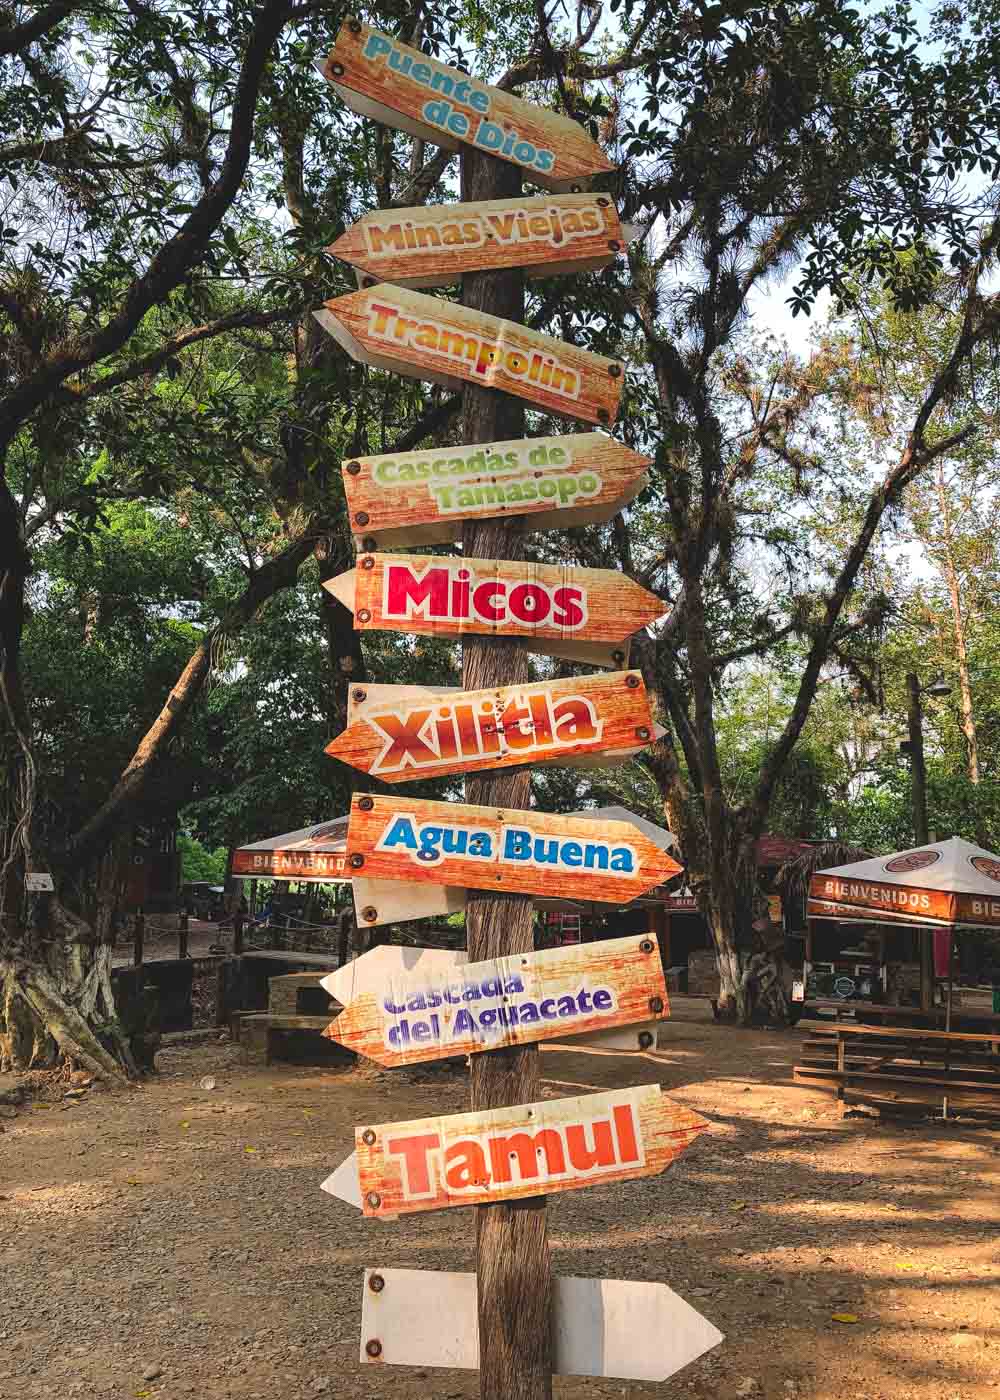 A wooden post with multiple signs pointing to different activities and locations within Huasteca Potosina.